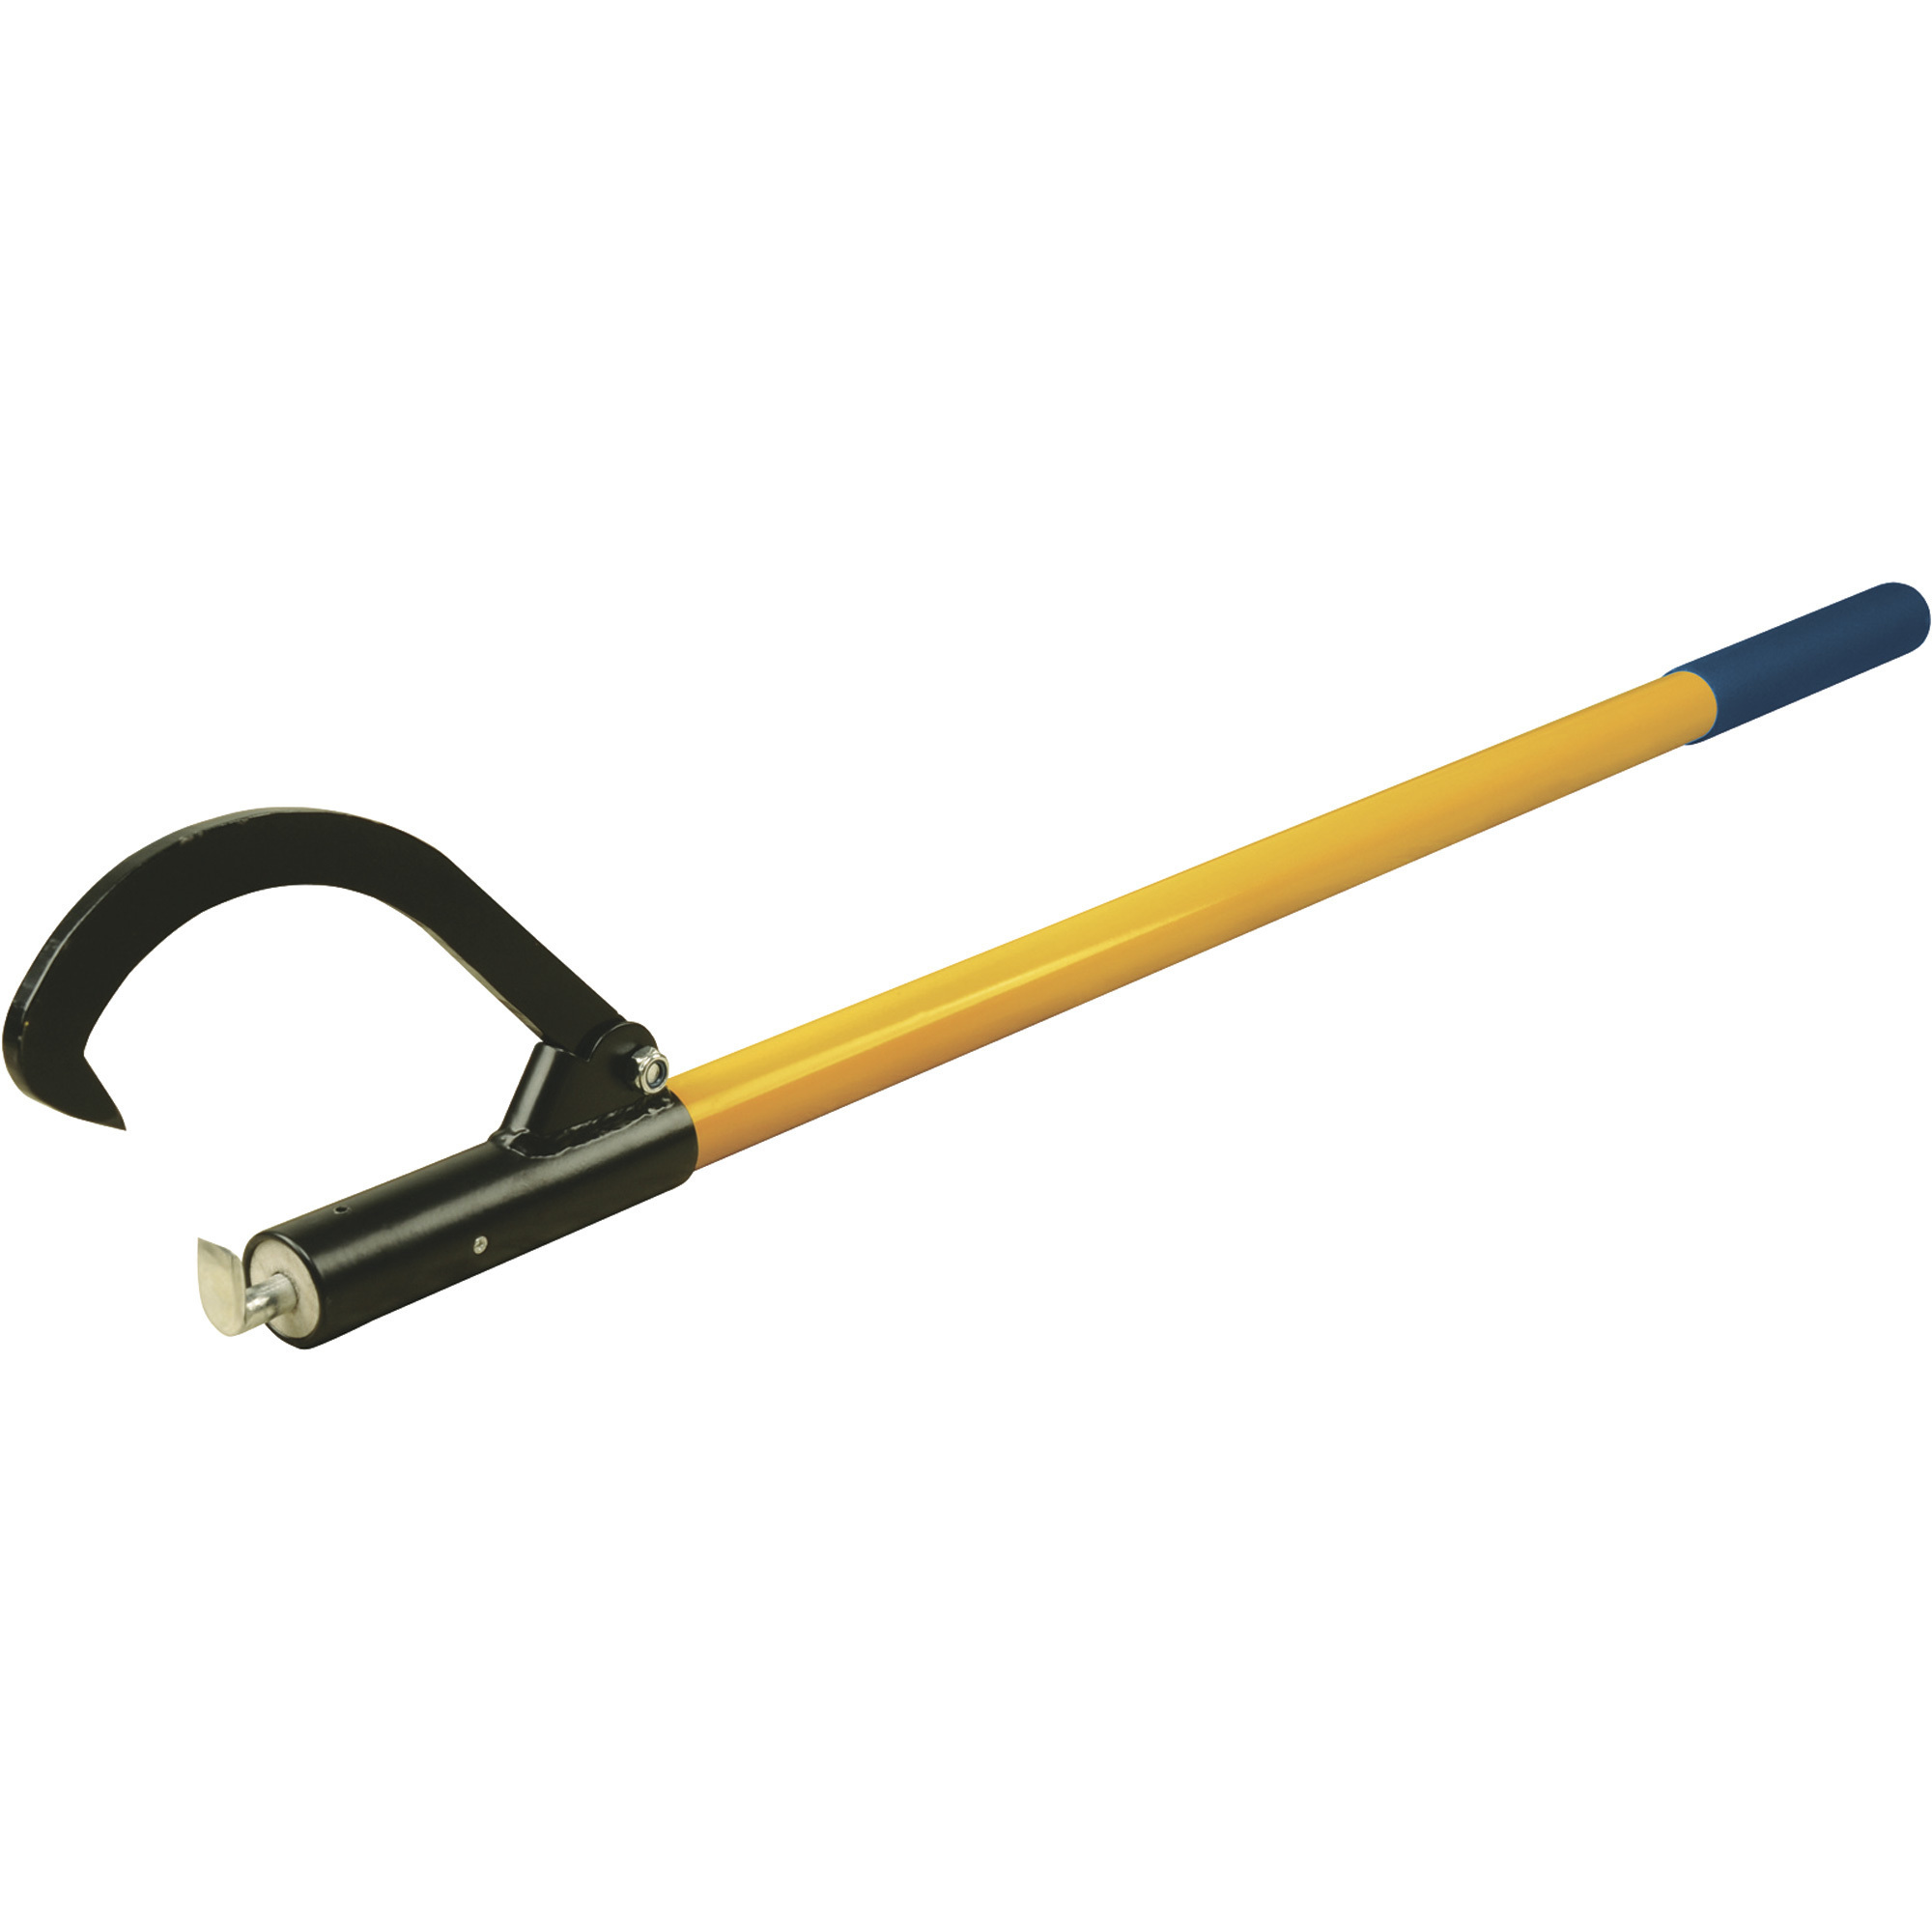 Roughneck Steel Core Cant Hook, 48Inch L